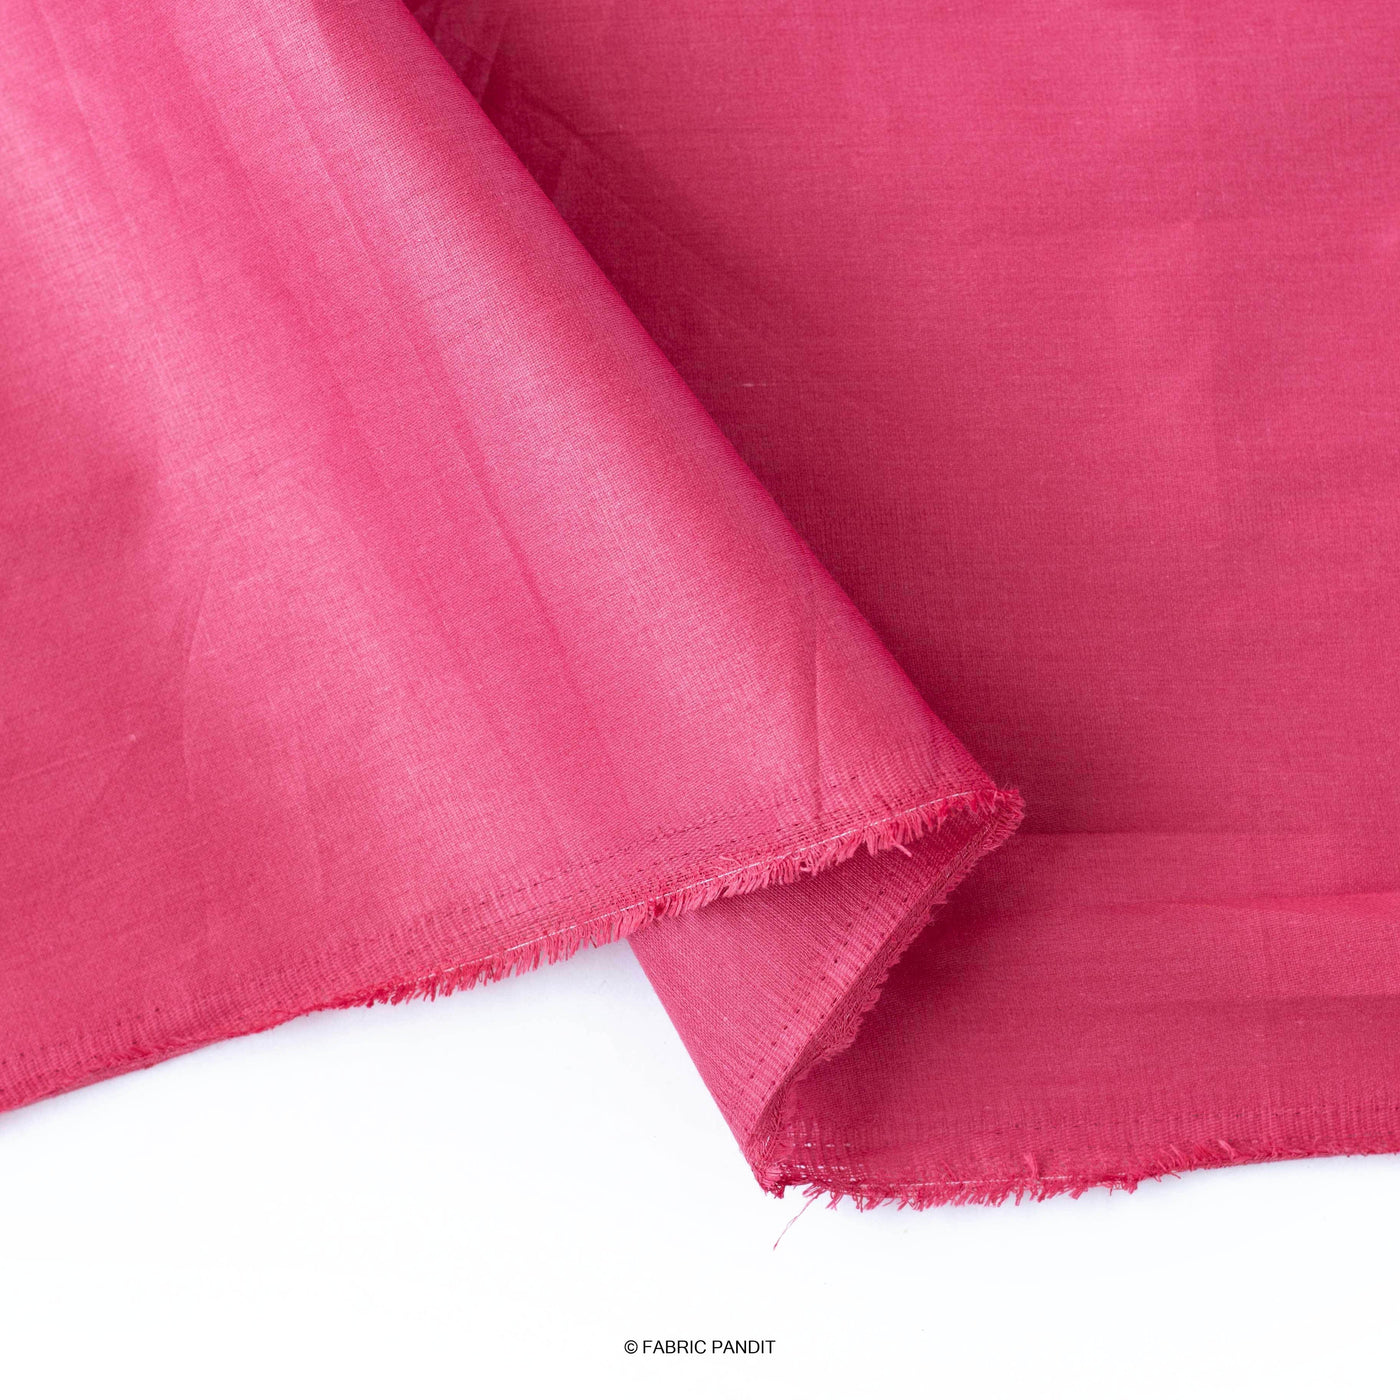 Fabric Pandit Fabric Rose Pink Color Plain Cotton Satin Fabric (Width 42 Inches)